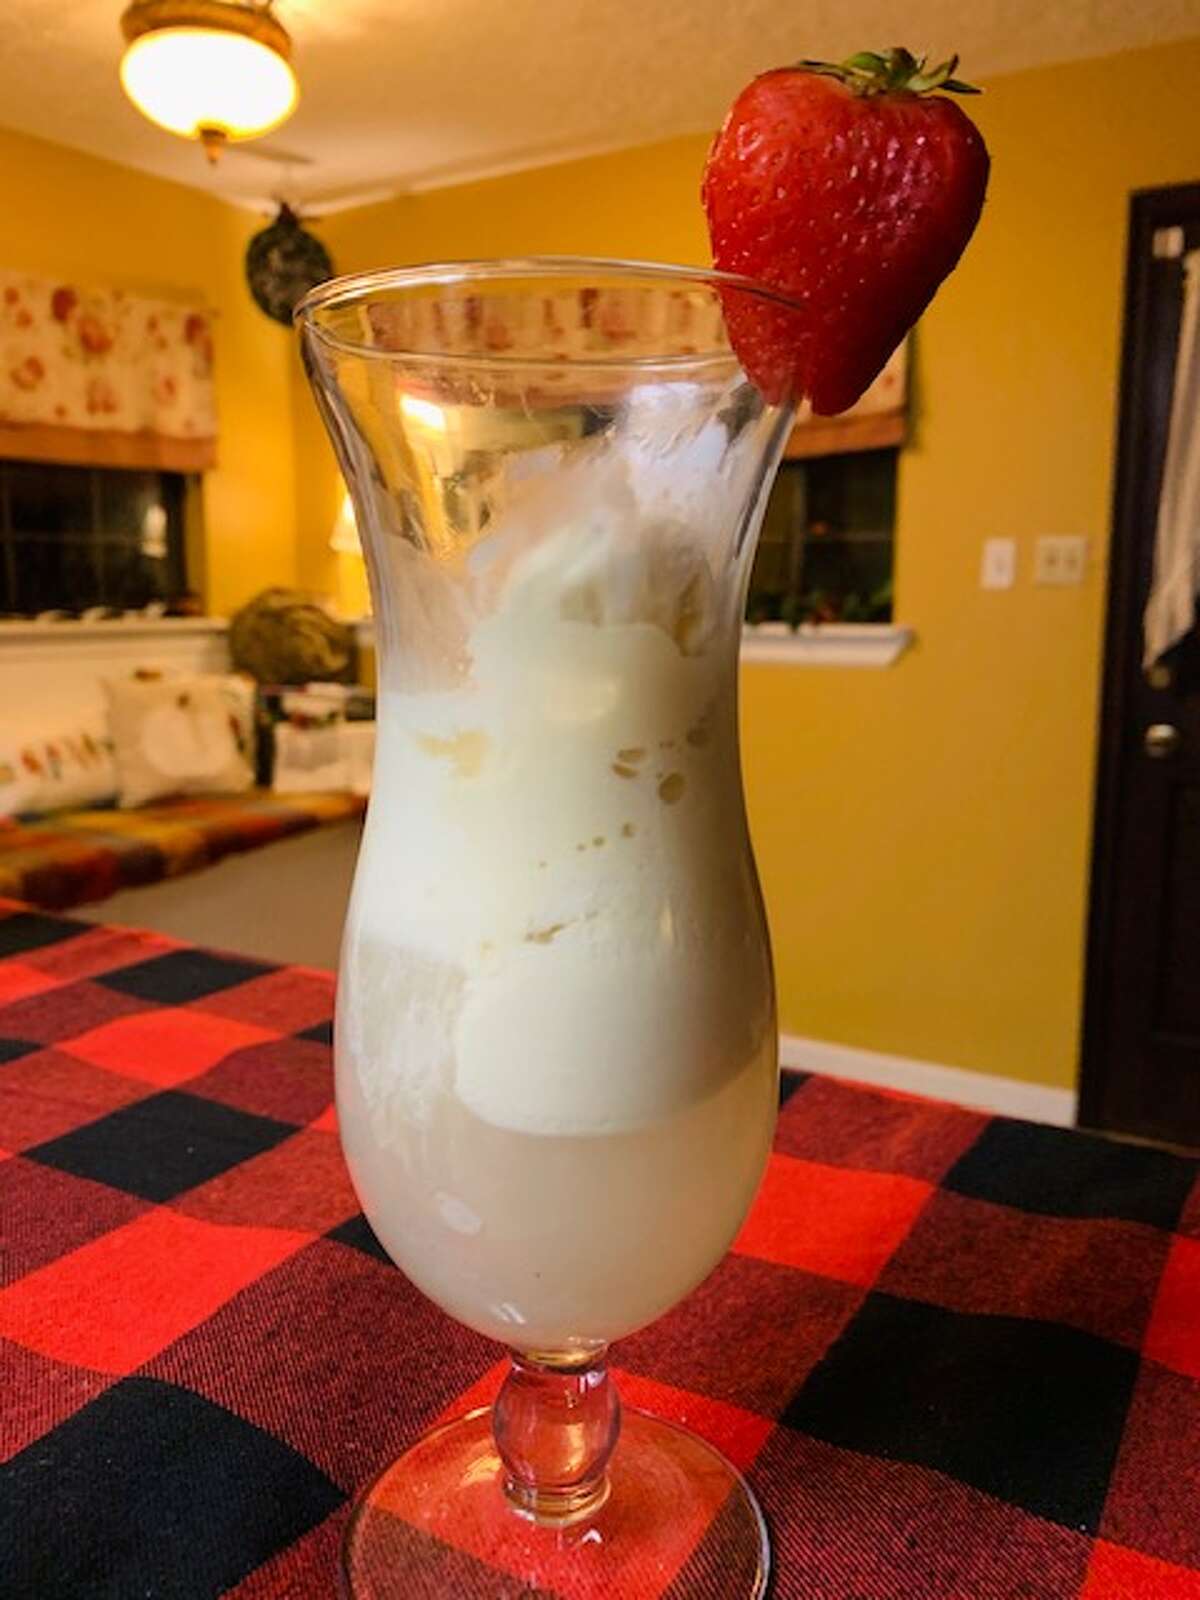 Let's call this one a creamy, vanilla miracle. Ingredients include: A Sauvignon Blanc white wine, and  three scoops of vanilla ice cream, topped off with a fresh strawberry in a tall glass.